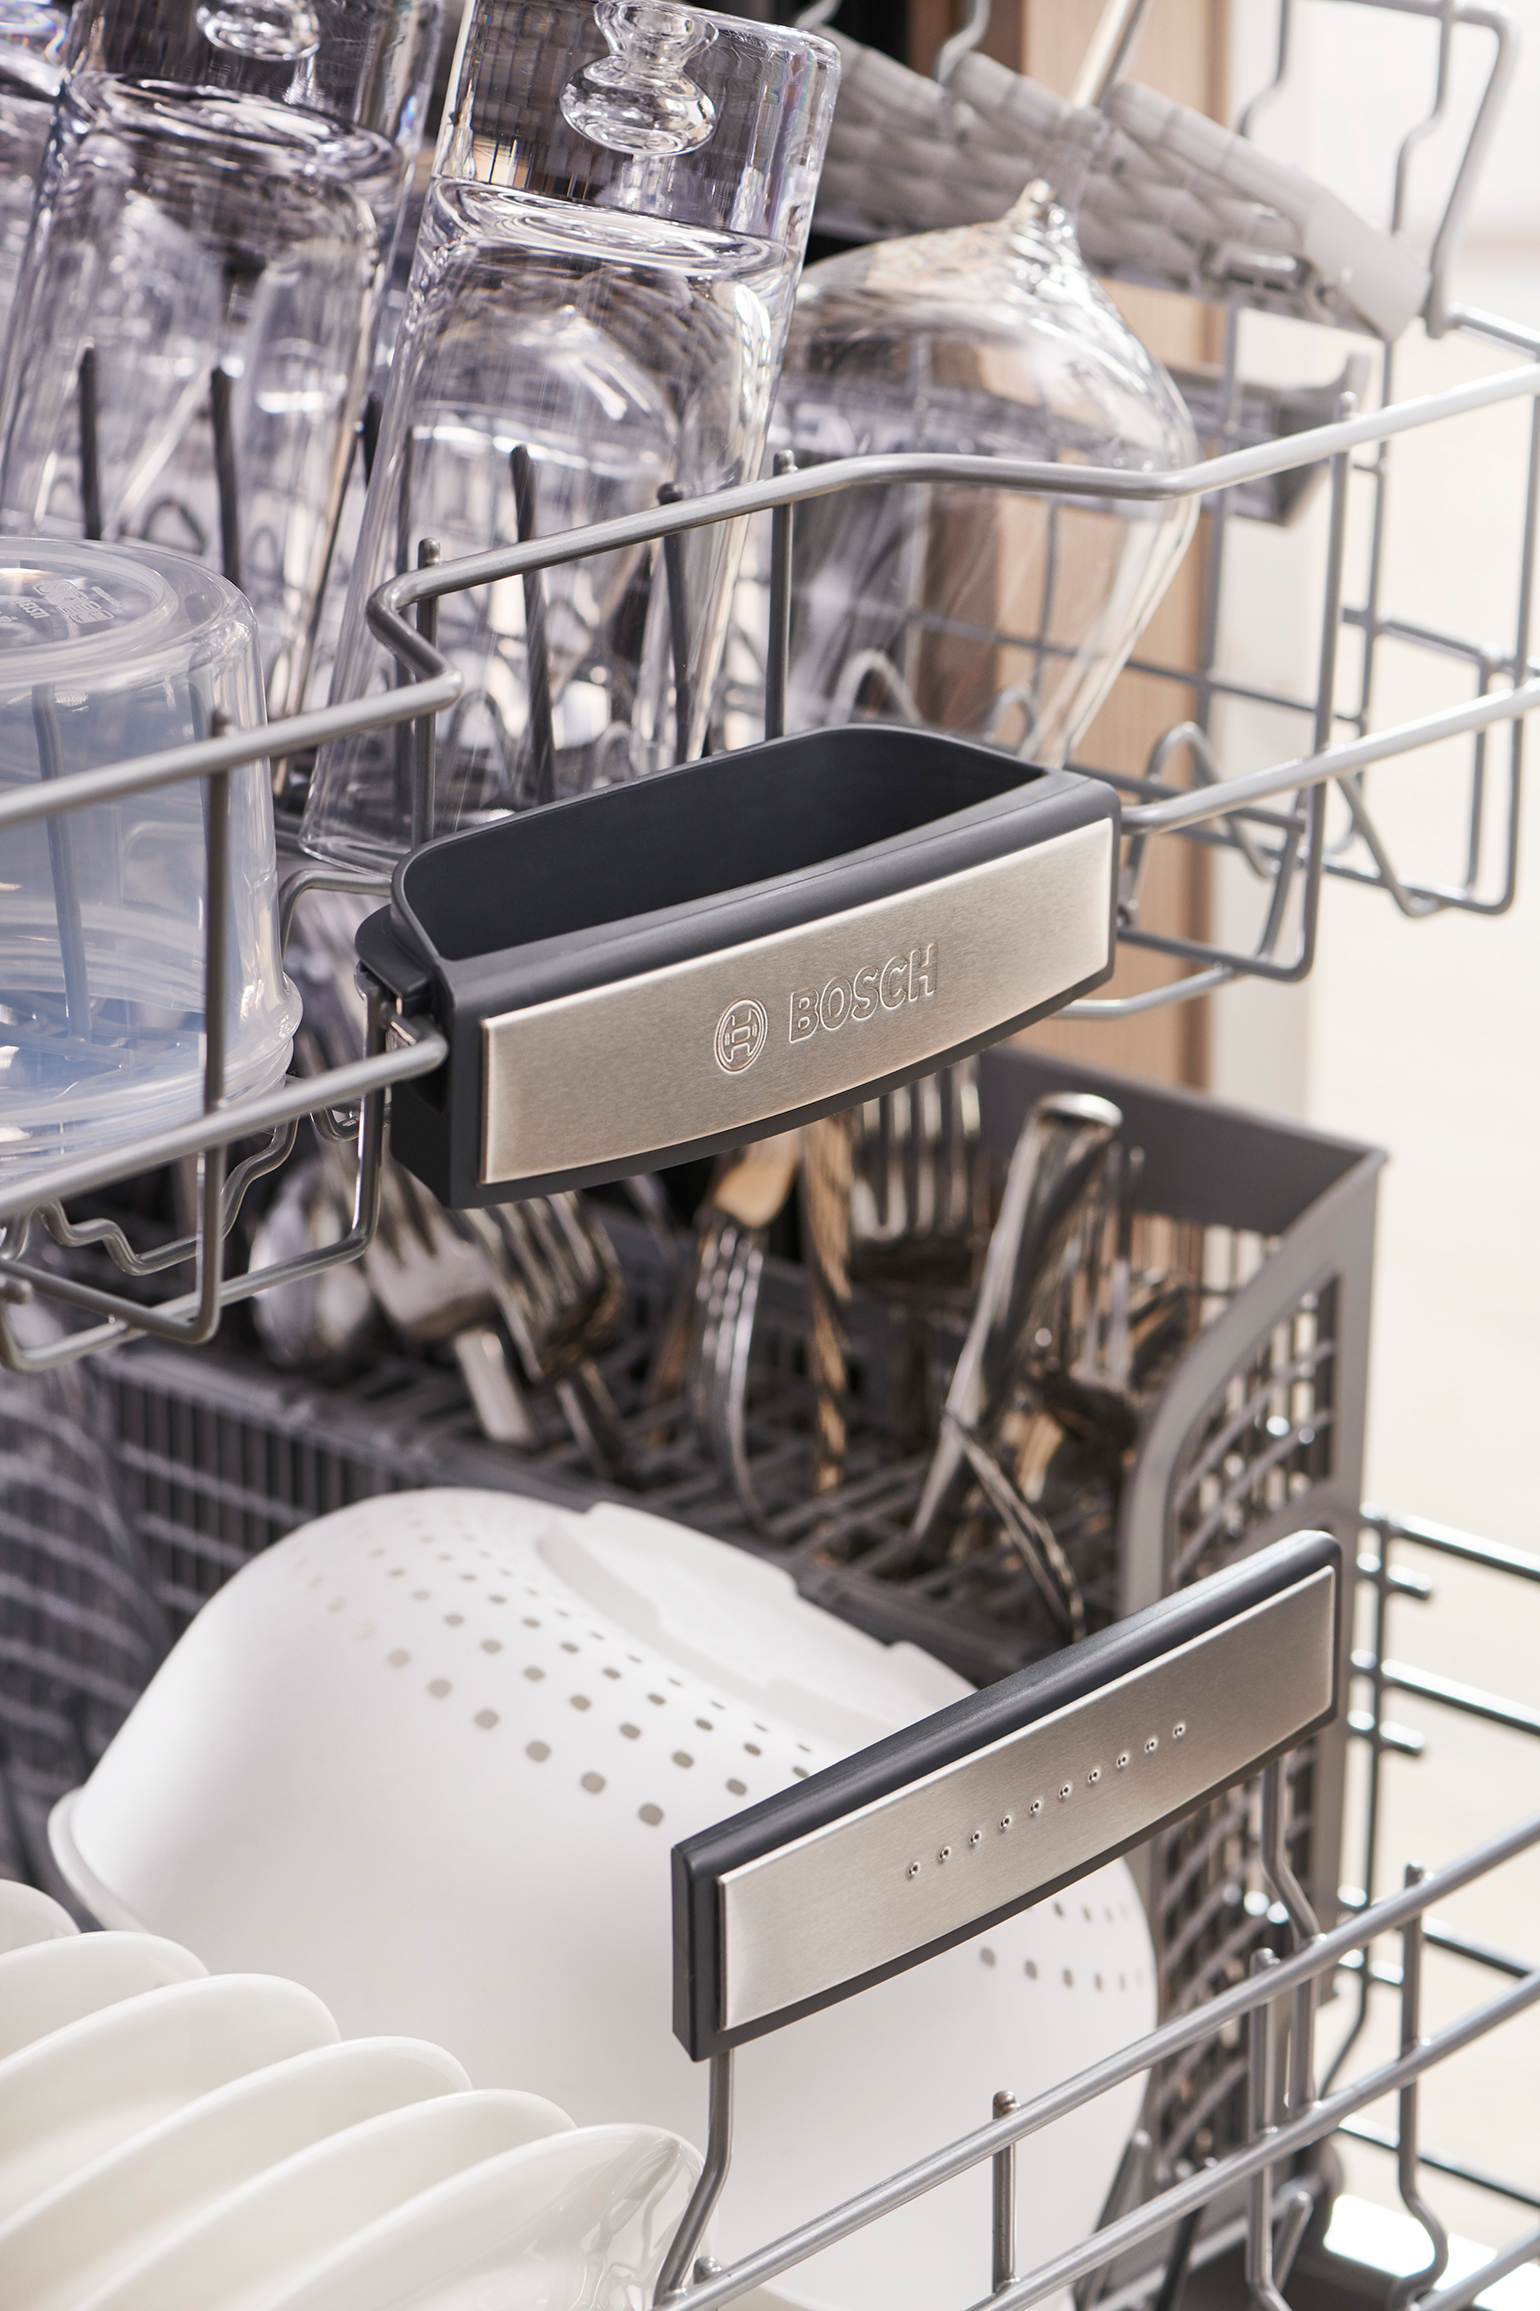 New Bosch 800 Series Dishwasher Crystal Dry At Best Buy